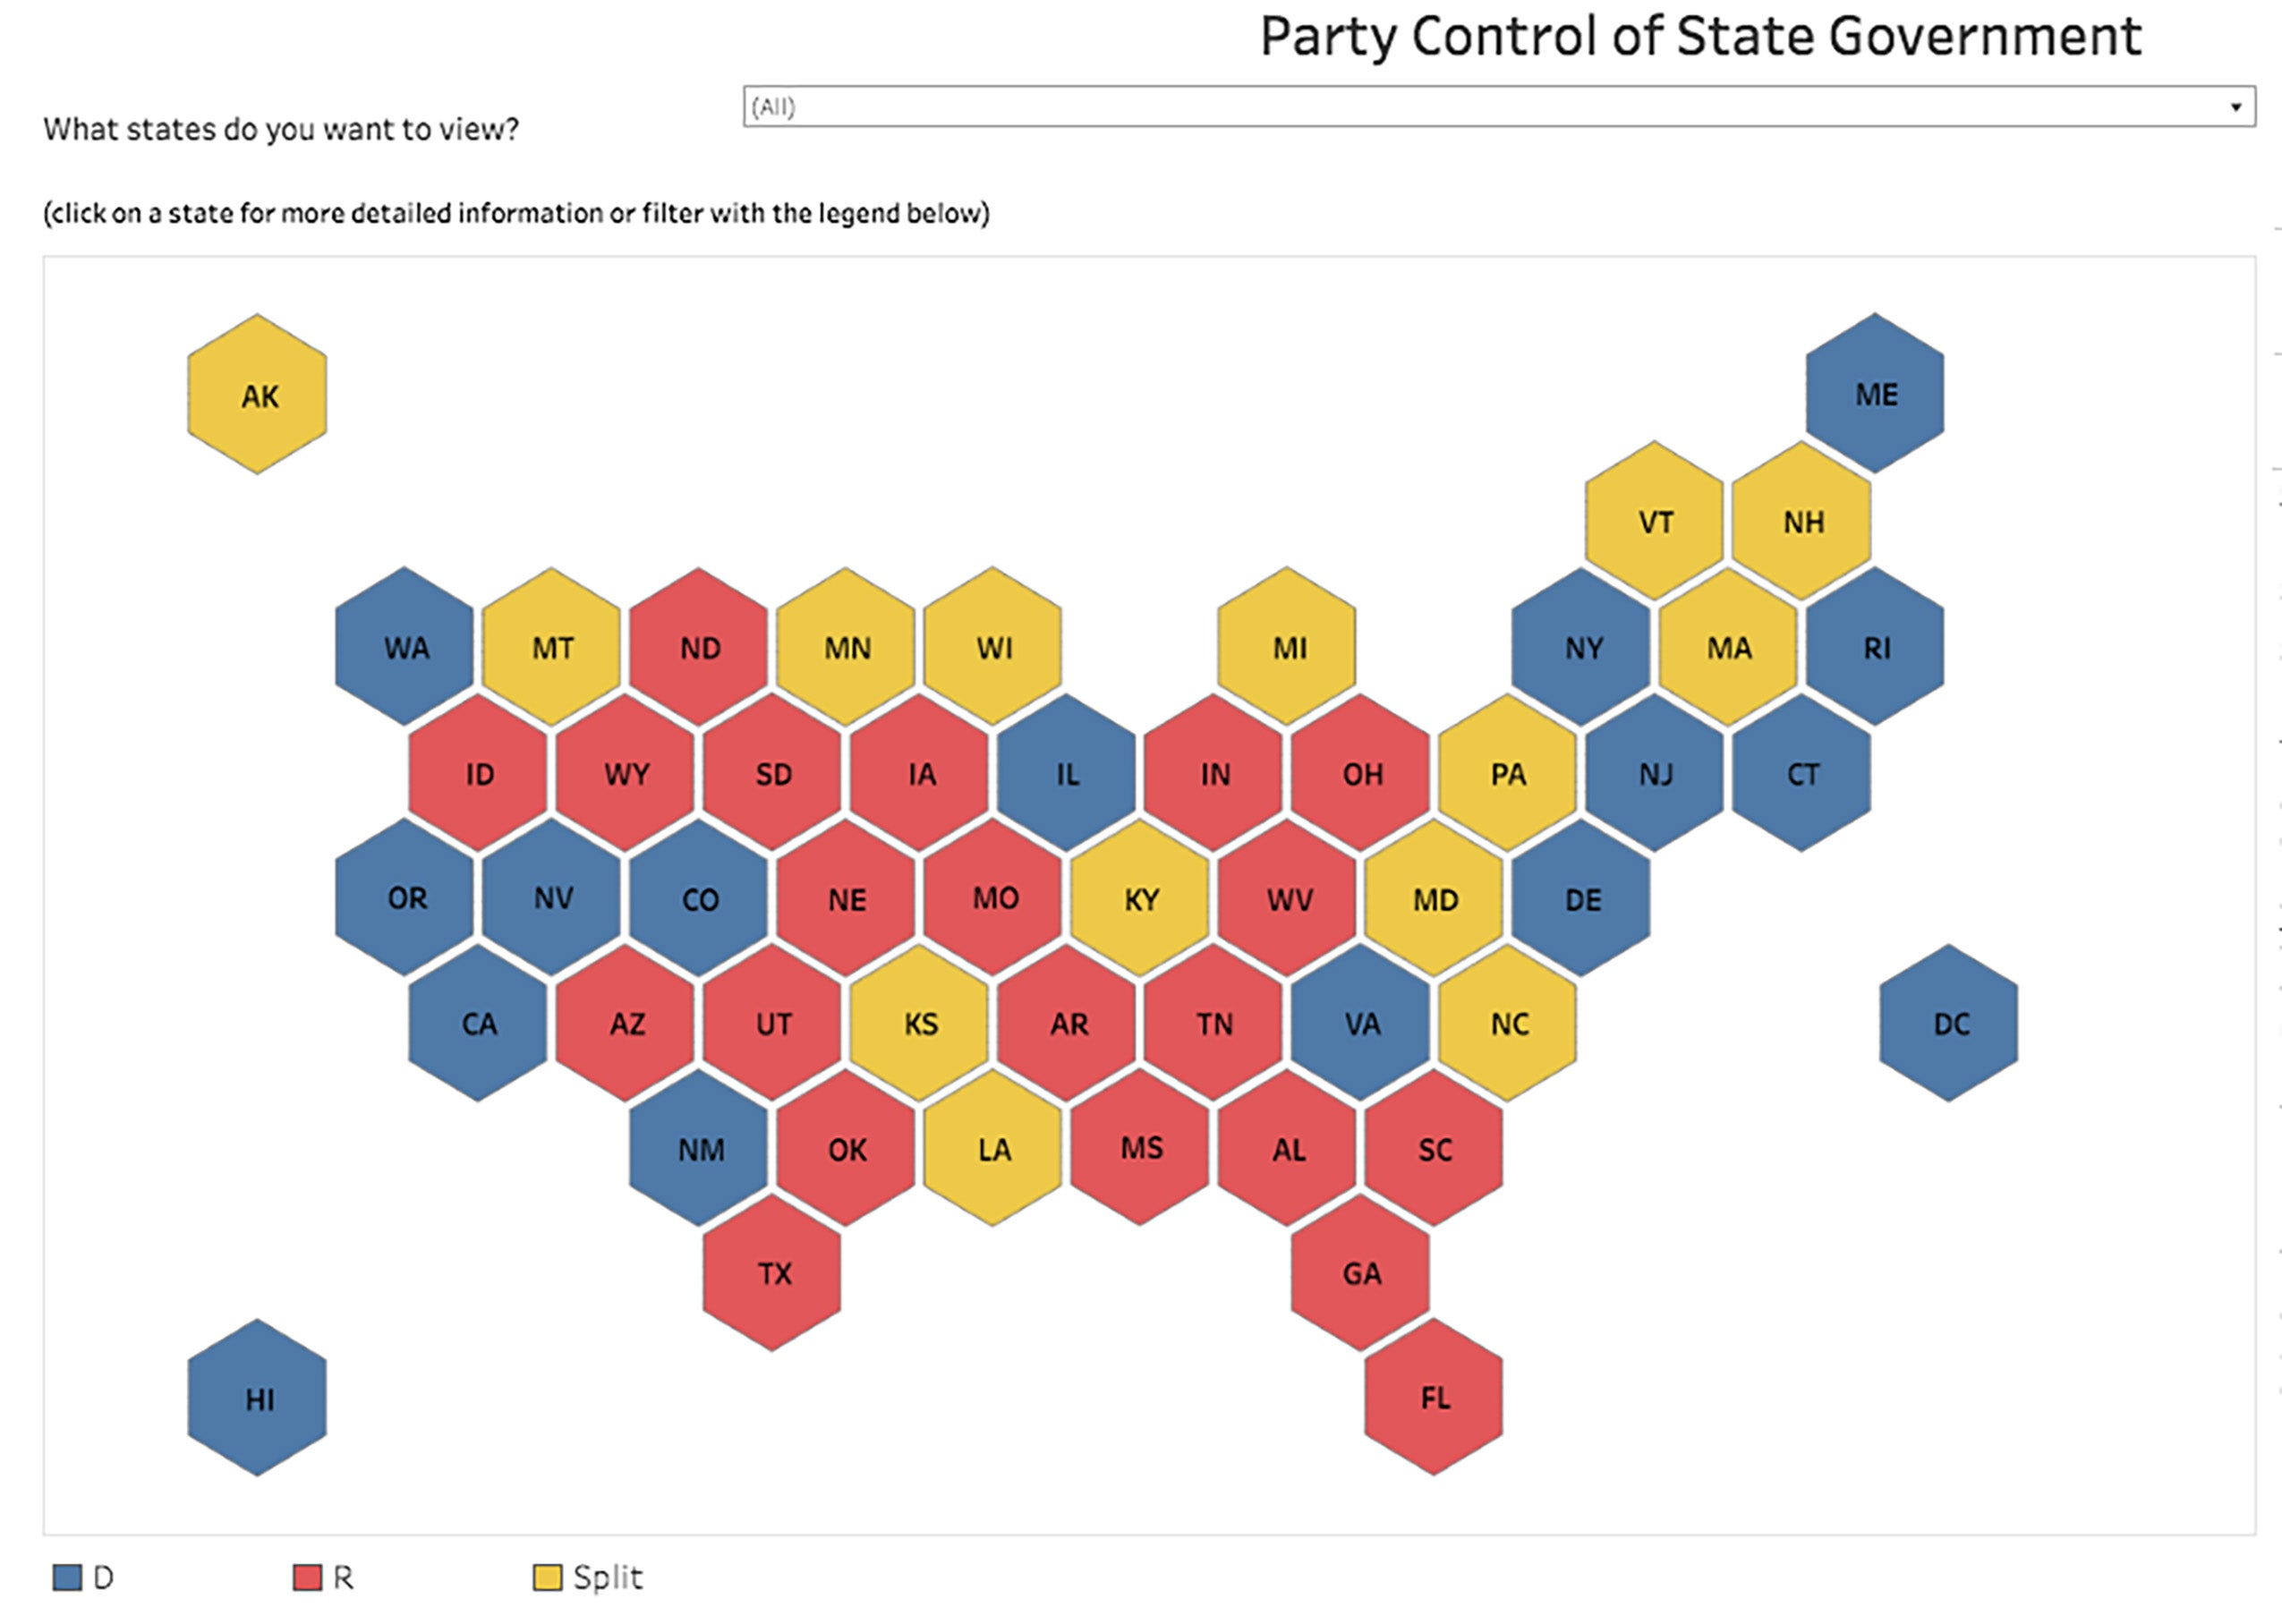 Map-Party Control of State Government